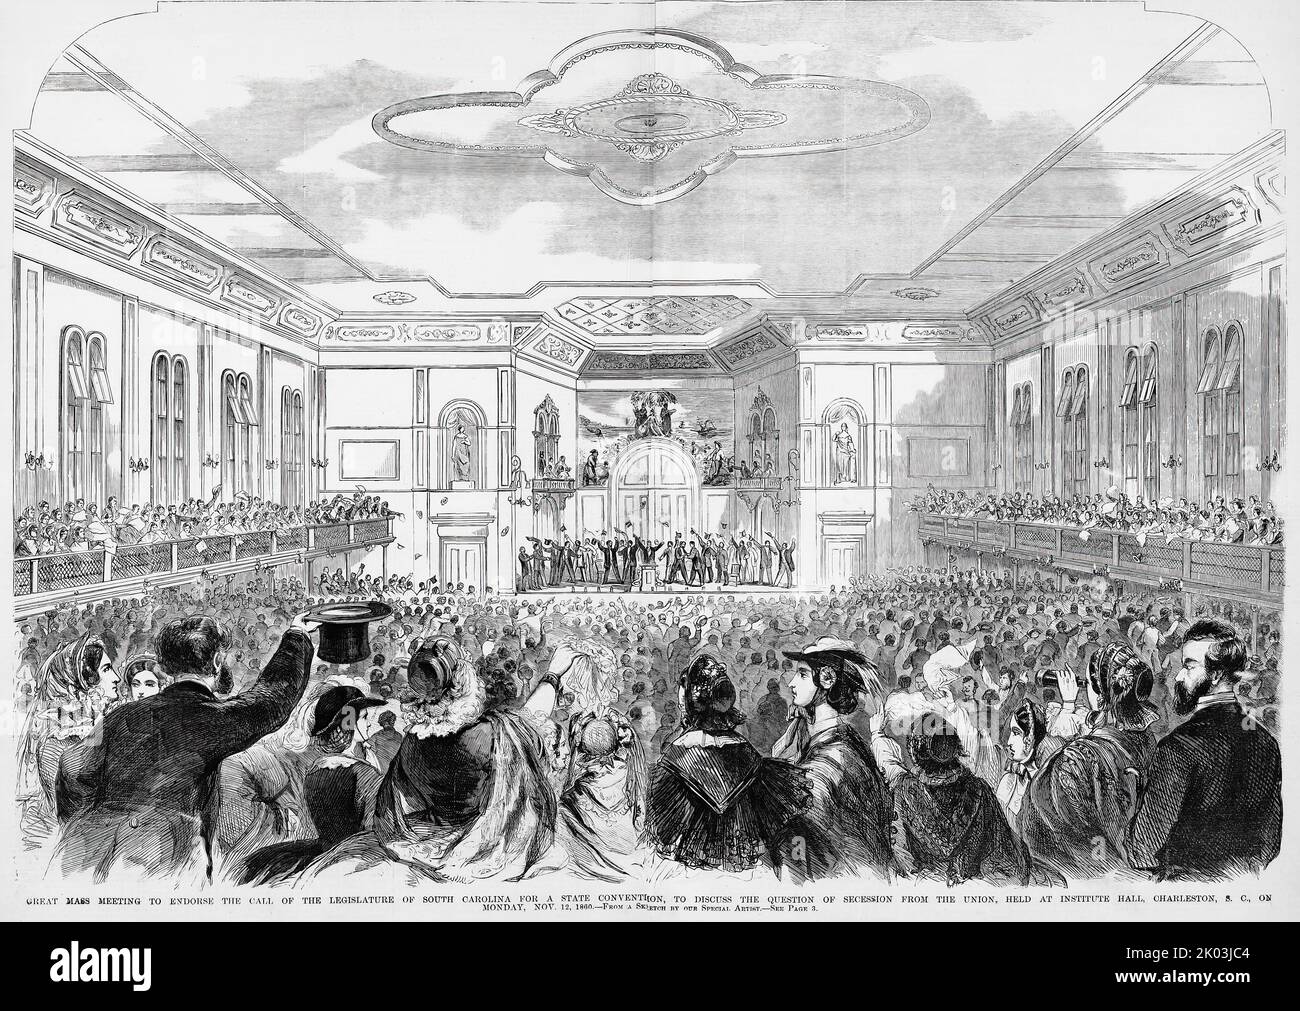 Great mass meeting to endorse the call of the legislature of South Carolina for a state convention, to discuss the question of secession from the Union, held at Institute Hall, Charleston, South Carolina, November 12th, 1860. 19th century American Civil War illustration from Frank Leslie's Illustrated Newspaper Stock Photo